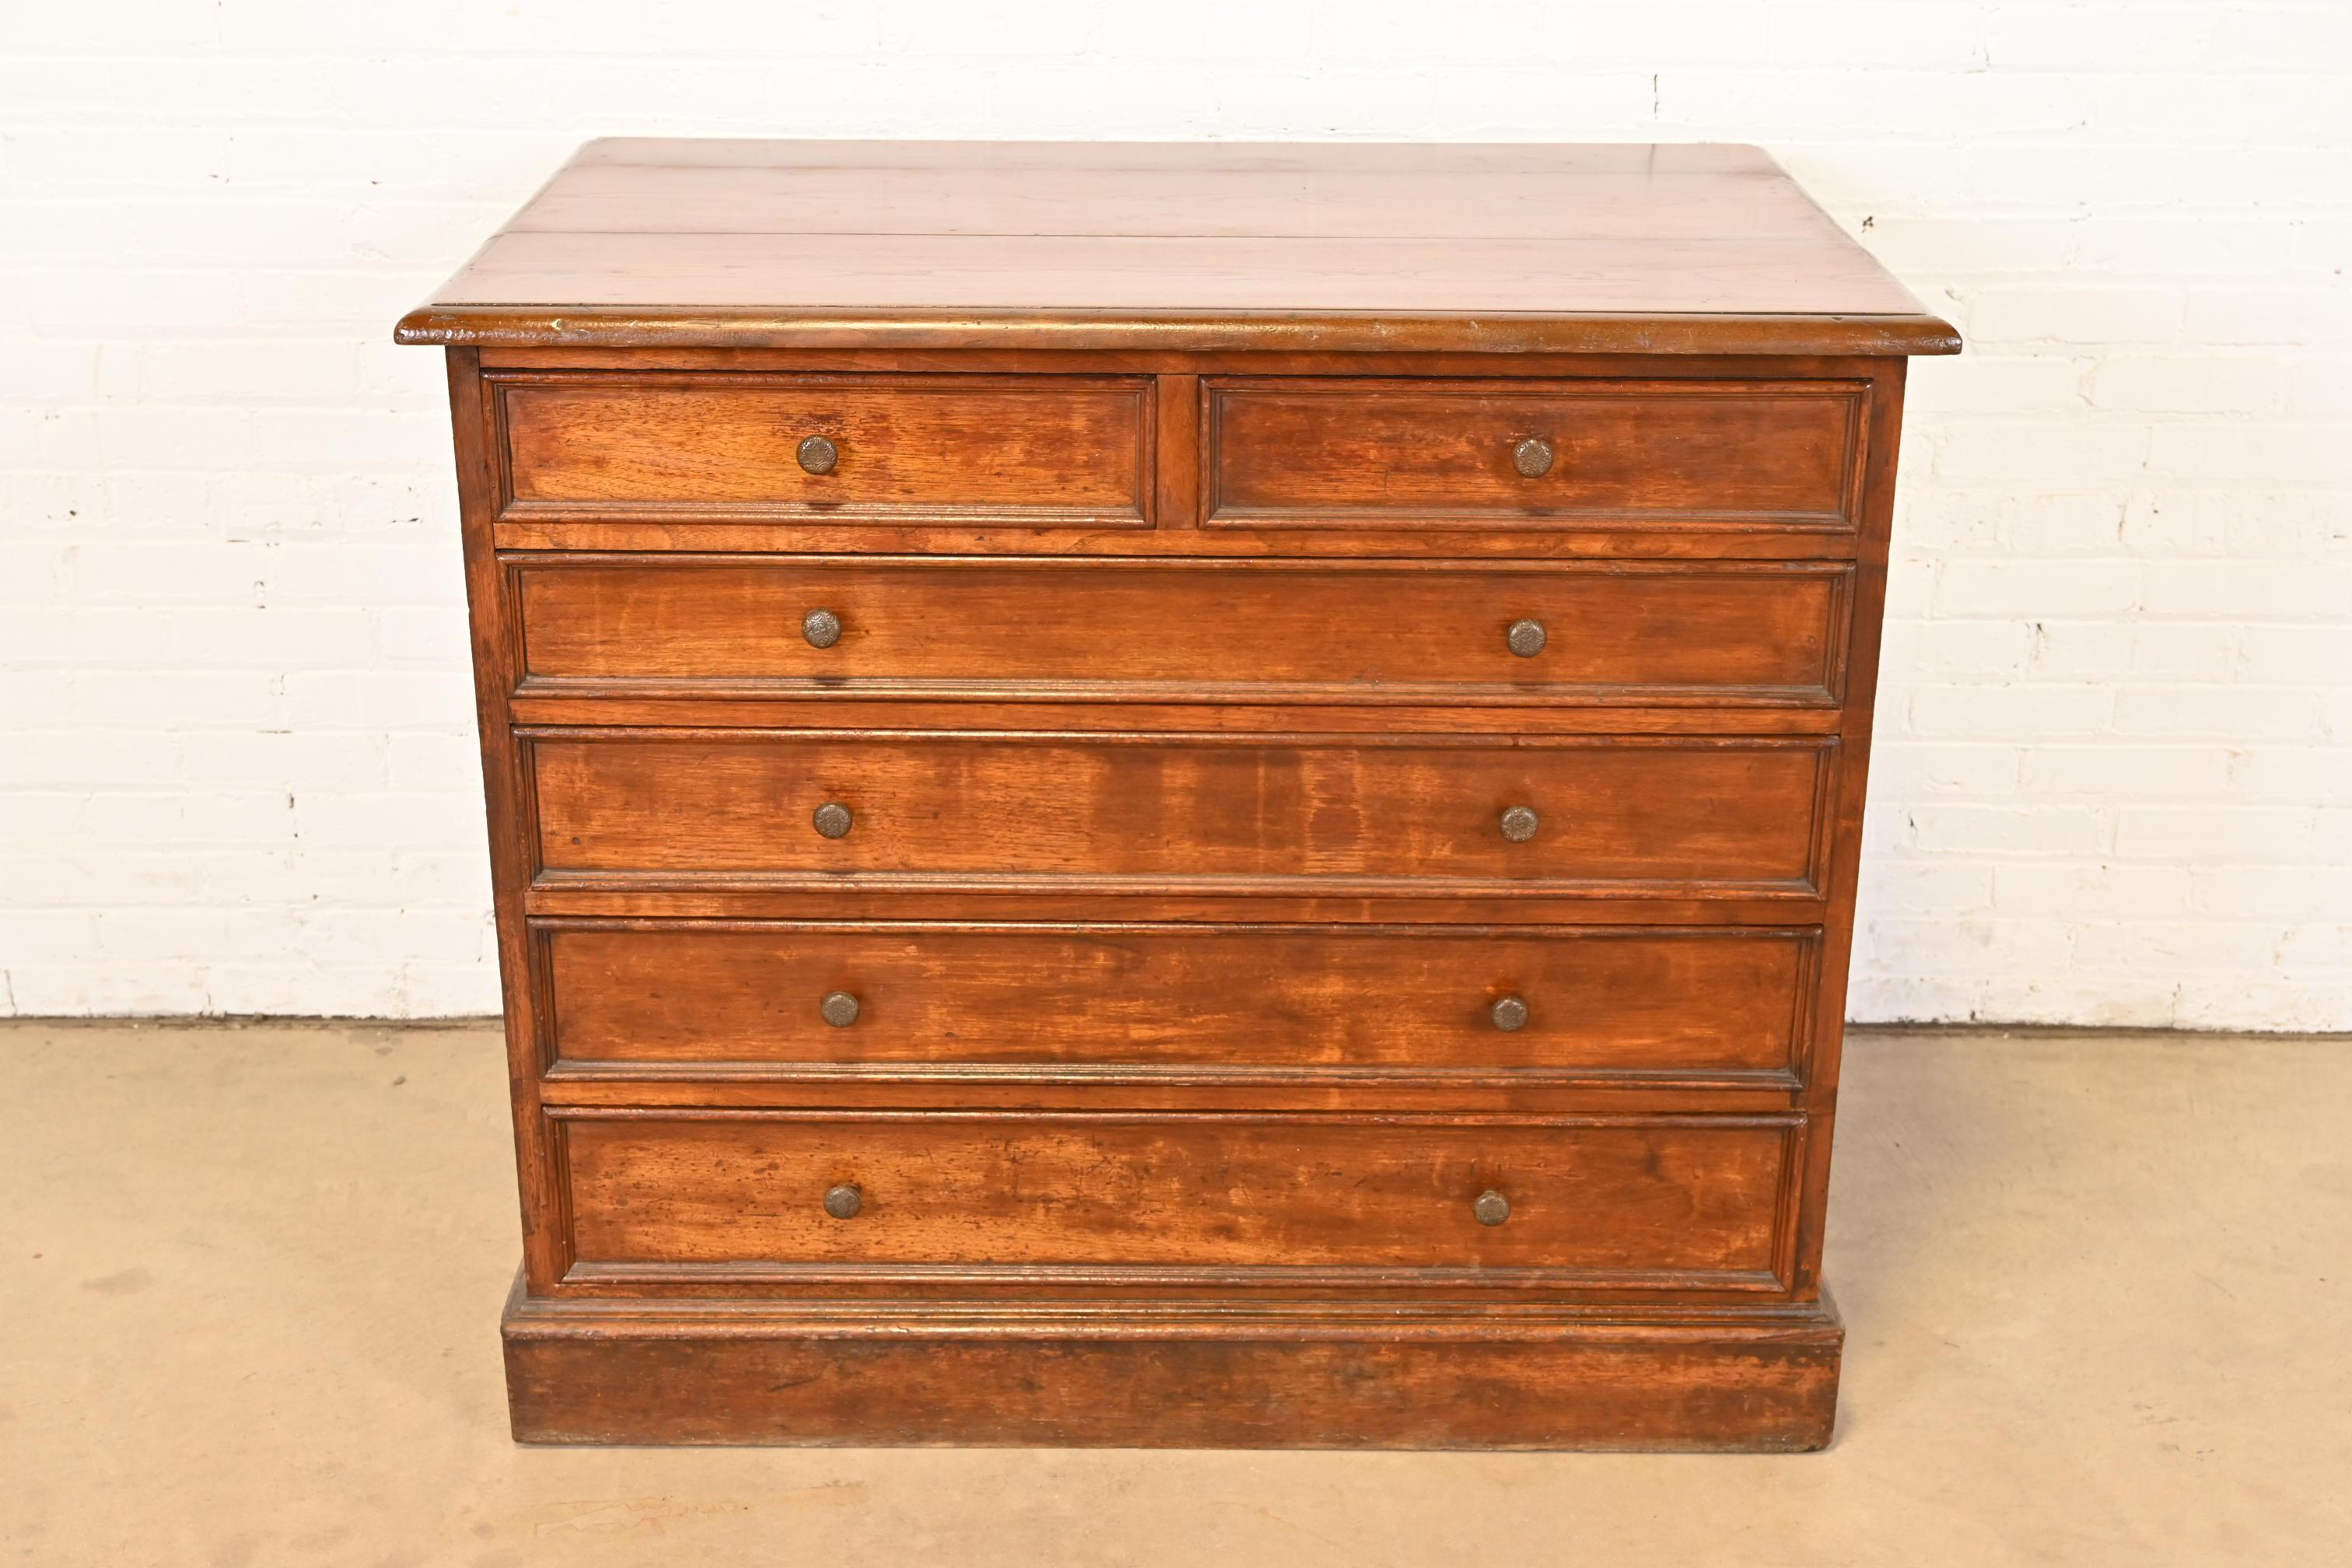 An exceptional Victorian or Arts & Crafts style solid walnut six-drawer architect's blueprint or map flat file cabinet or collector's cabinet

USA, Late 19th Century

Measures: 44.5